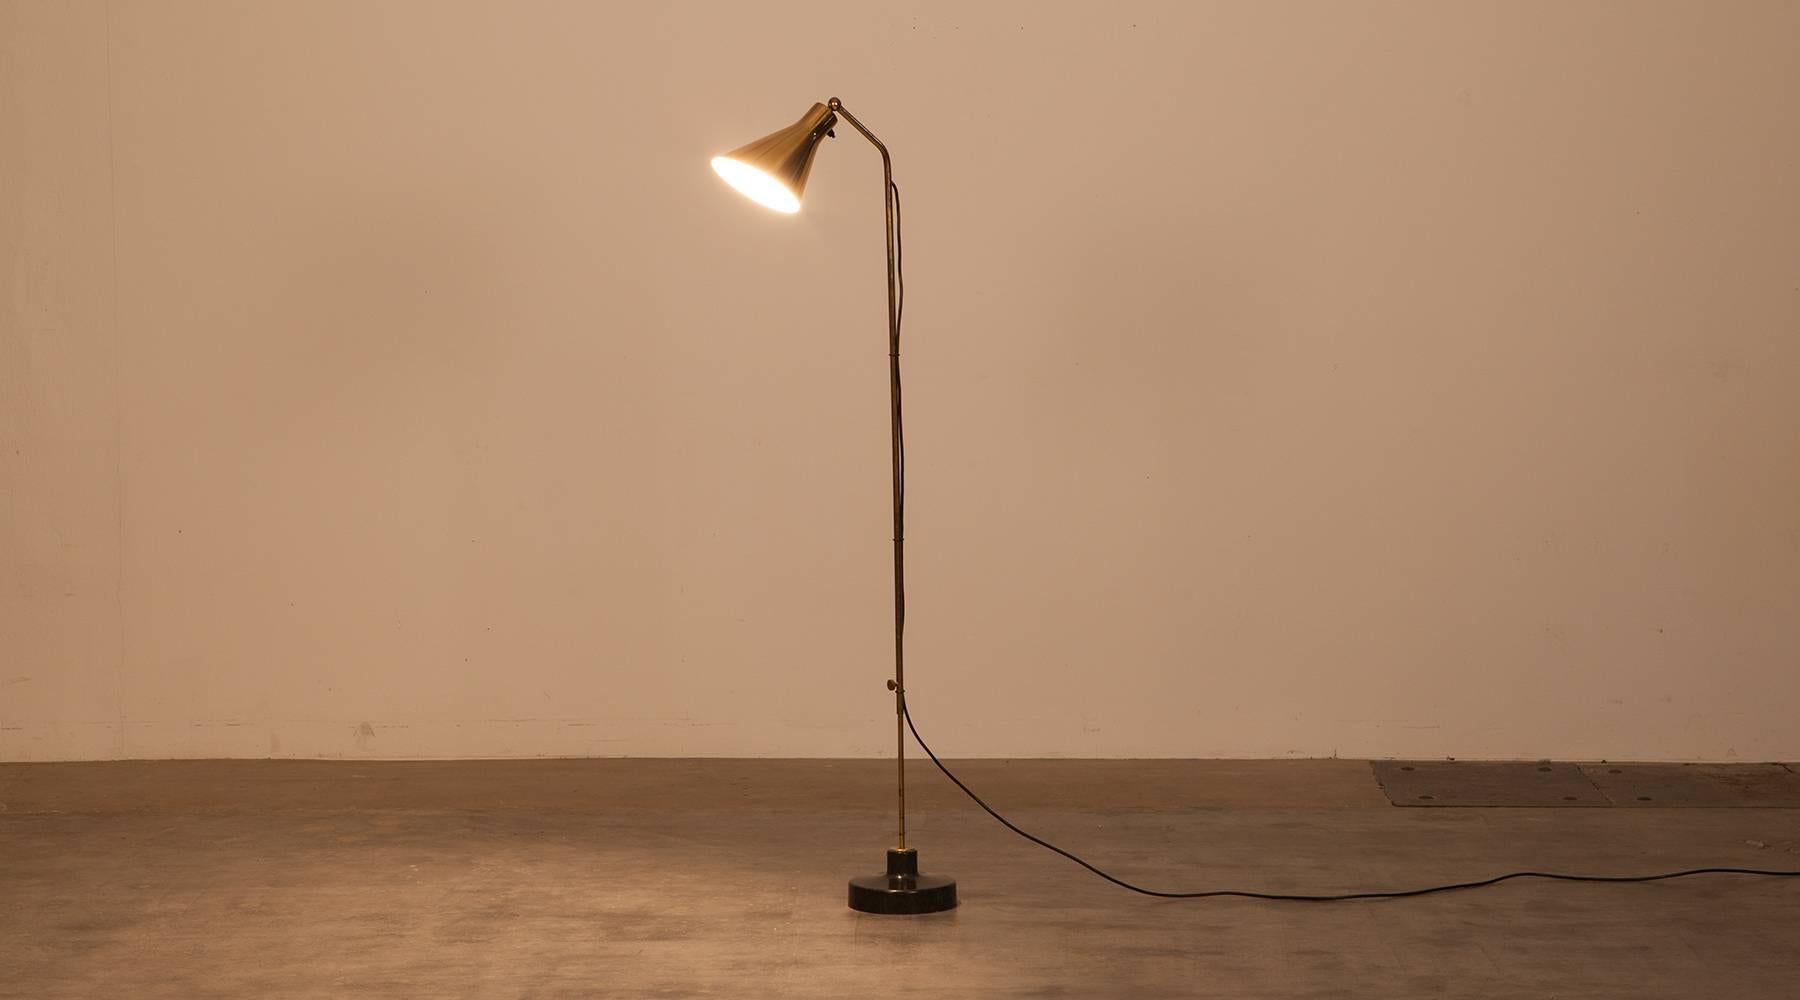 This lamp is a original and exceptional piece. It is an early example designed by Ignazio Gardella in 1940s. The floor lamp is adjustable in height as well as at the shade, which definitely gives a warm and pleasant light. Its solid base is a round